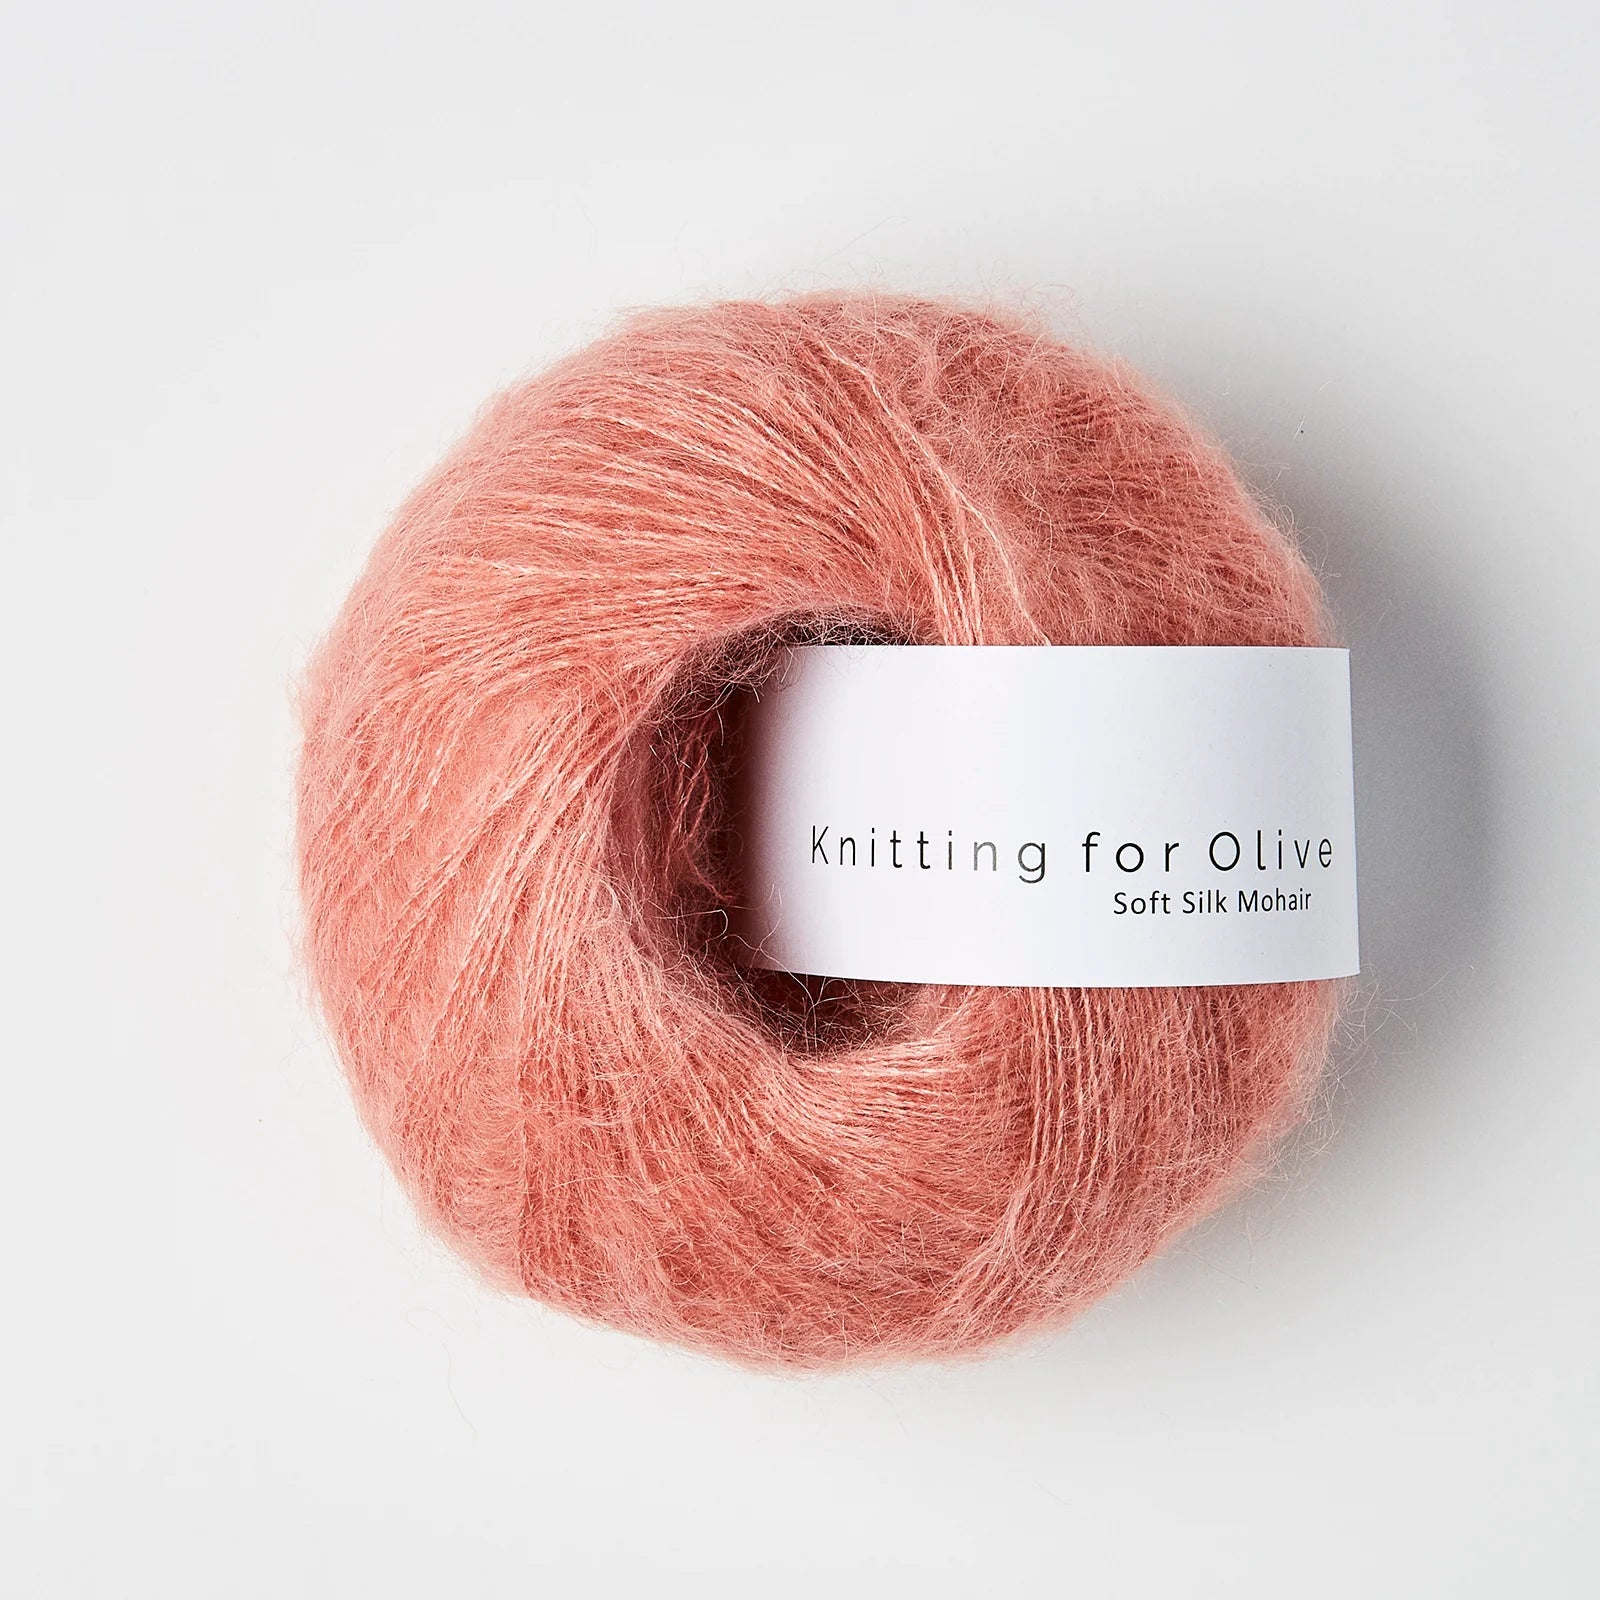 Knitting for Olive Soft Silk Mohair - Knitting for Olive - Flamingo - The Little Yarn Store